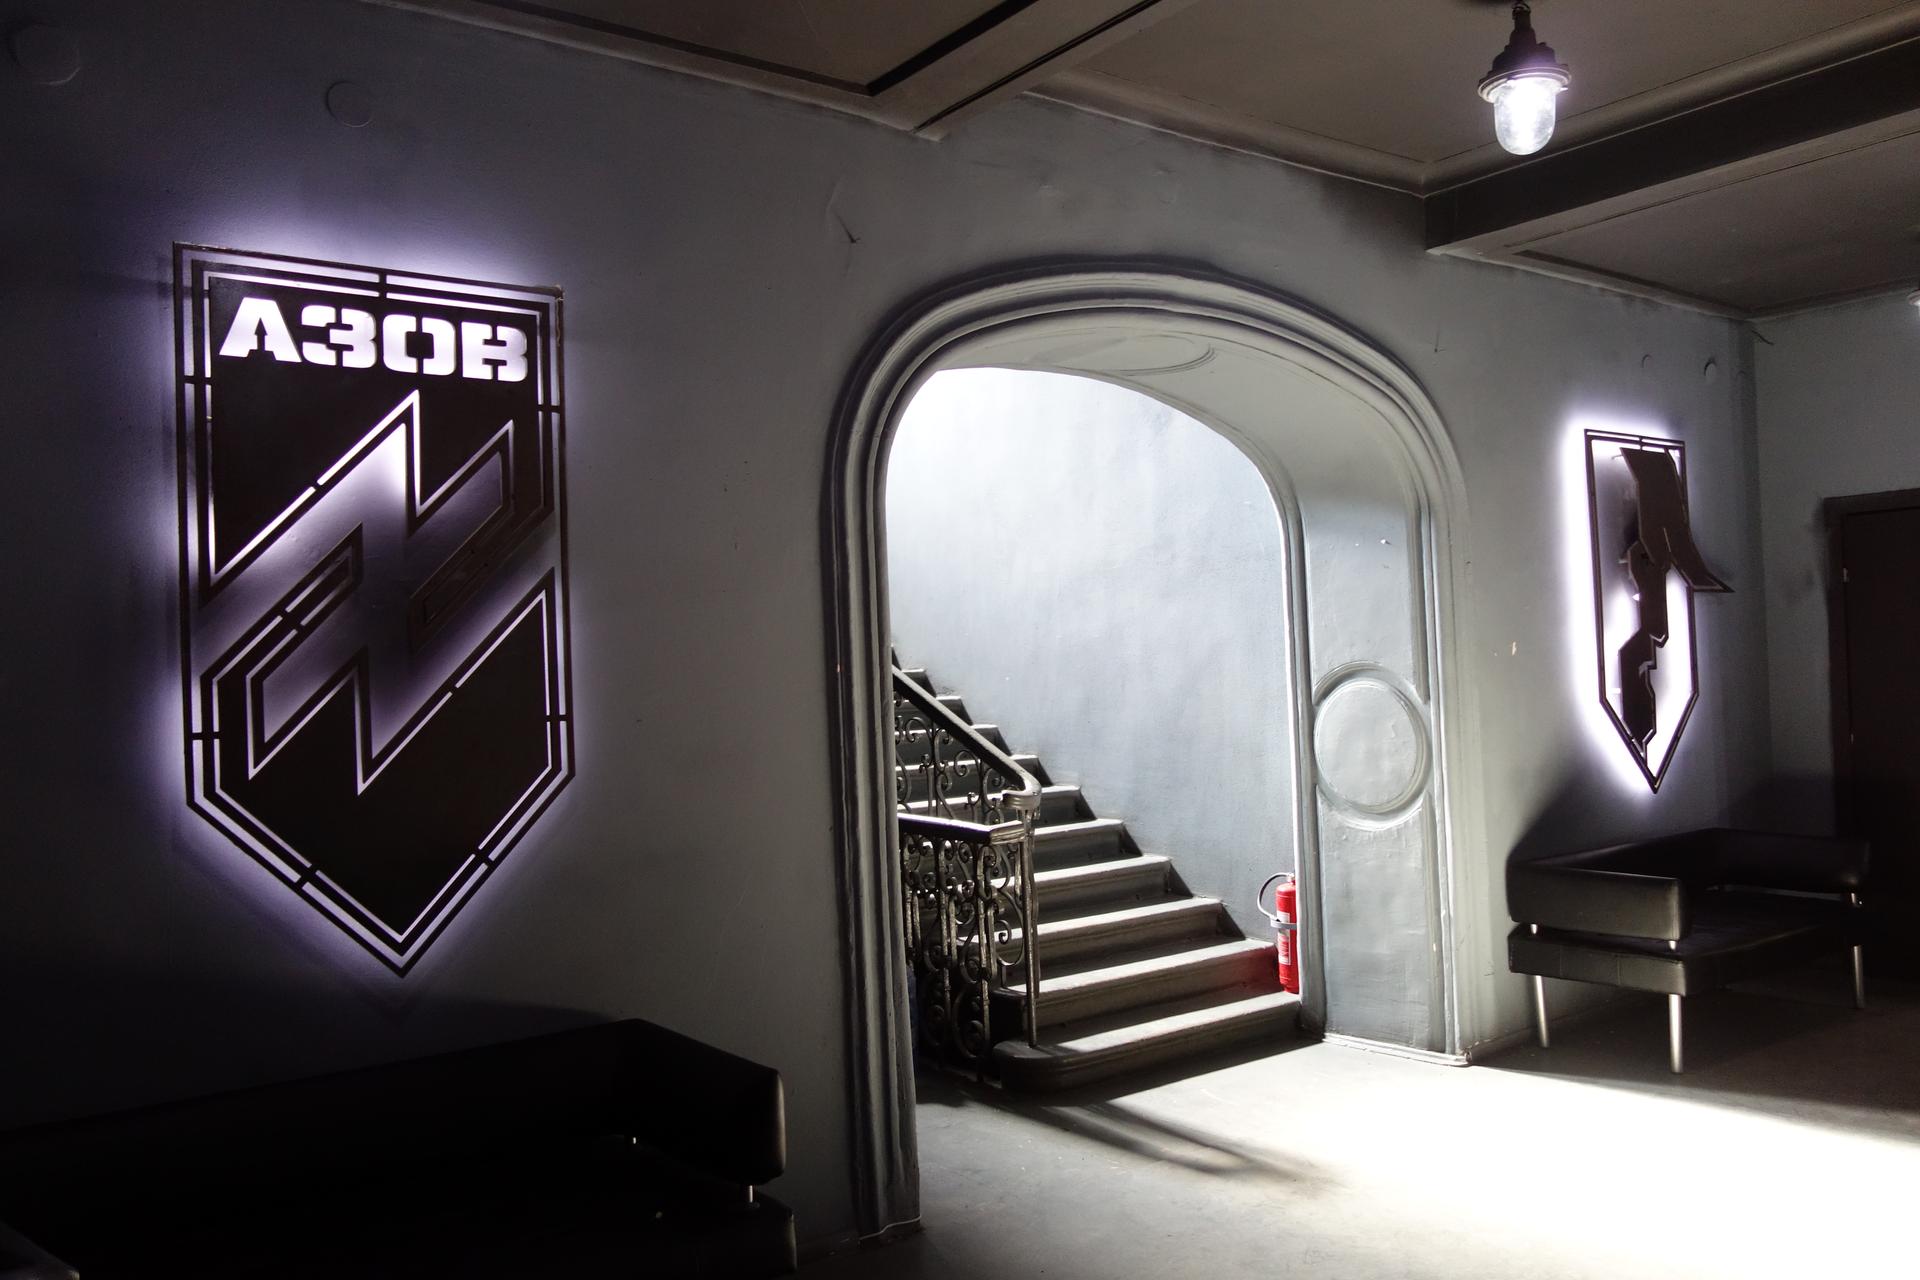 hallway with lit up black and white logo on the wall